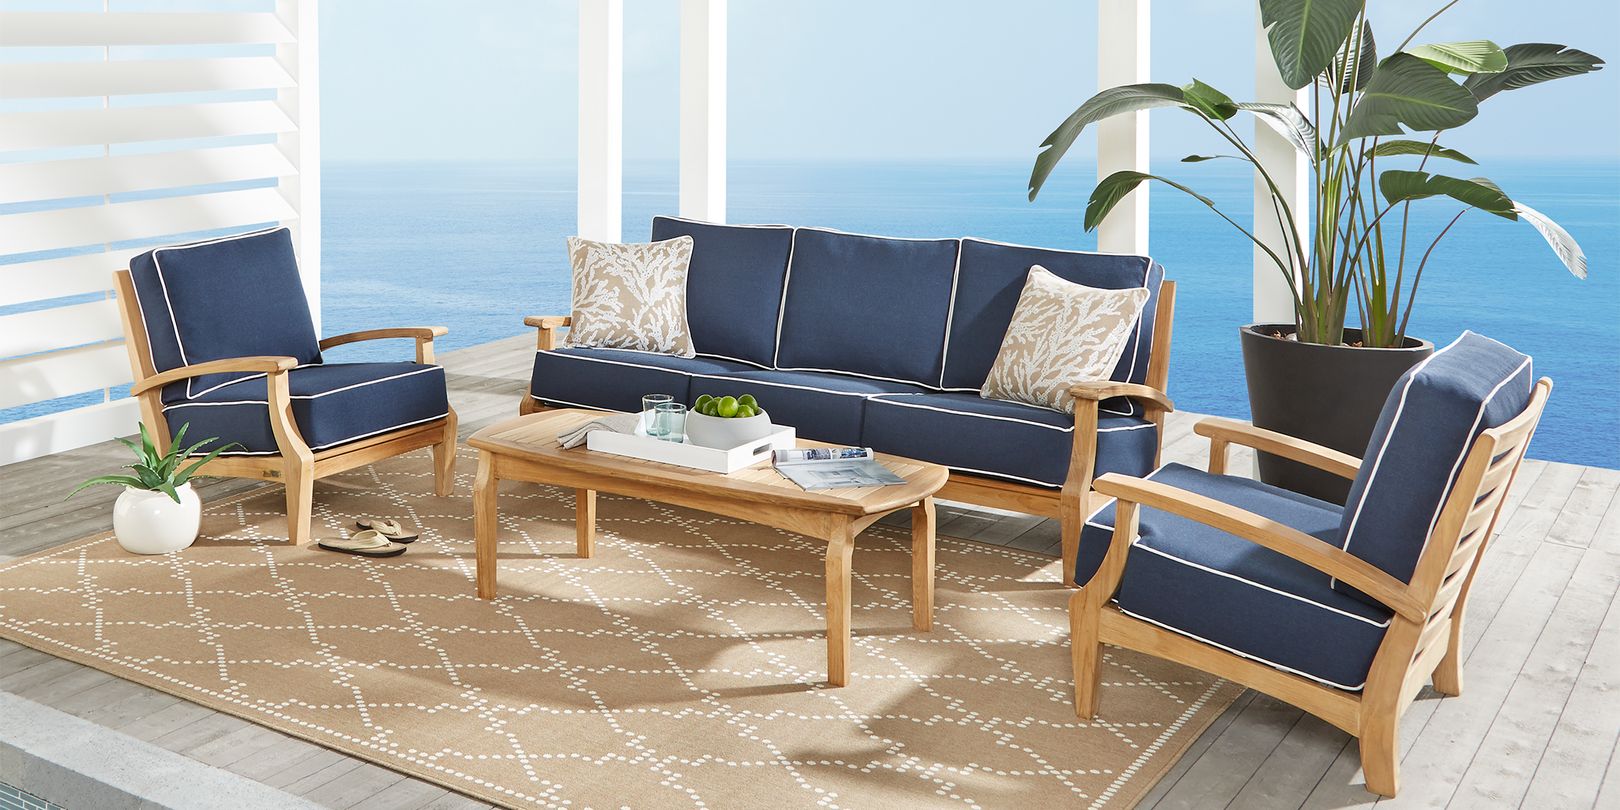 Photo of acacia wood patio seating set with blue cusions